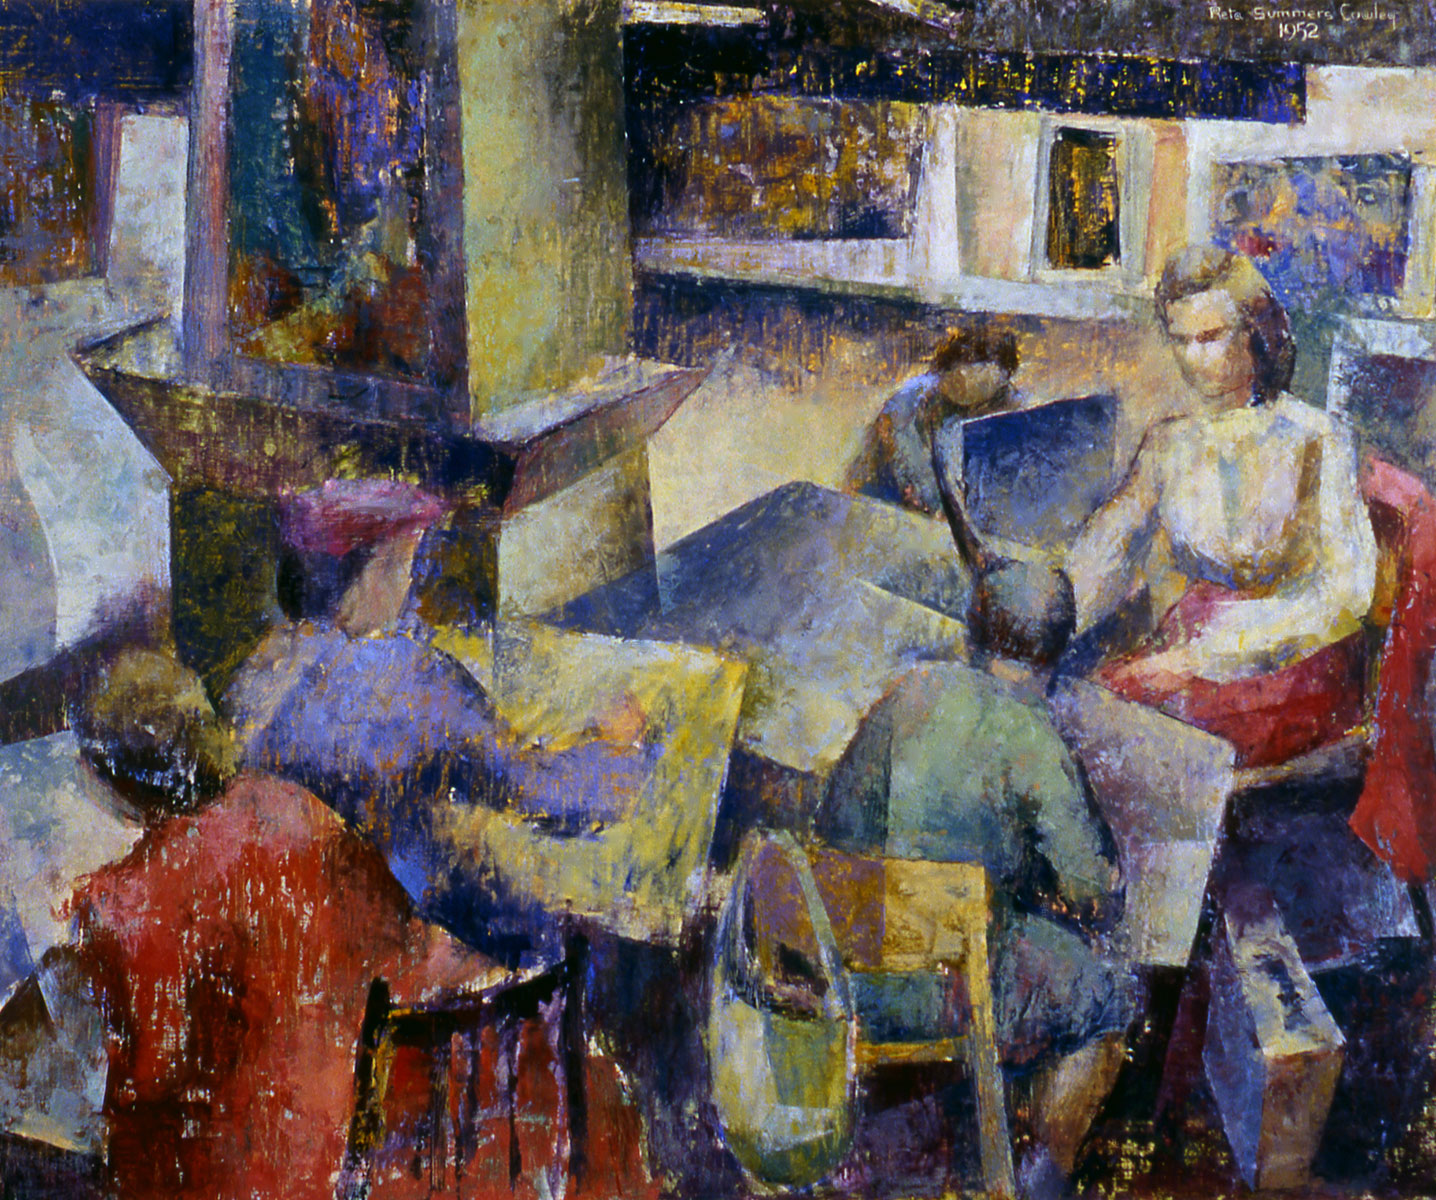 Painting of several female figures sitting and painting in an indoor space. The shapes are blocky and colour worn away in places to reveal contrasting hues.